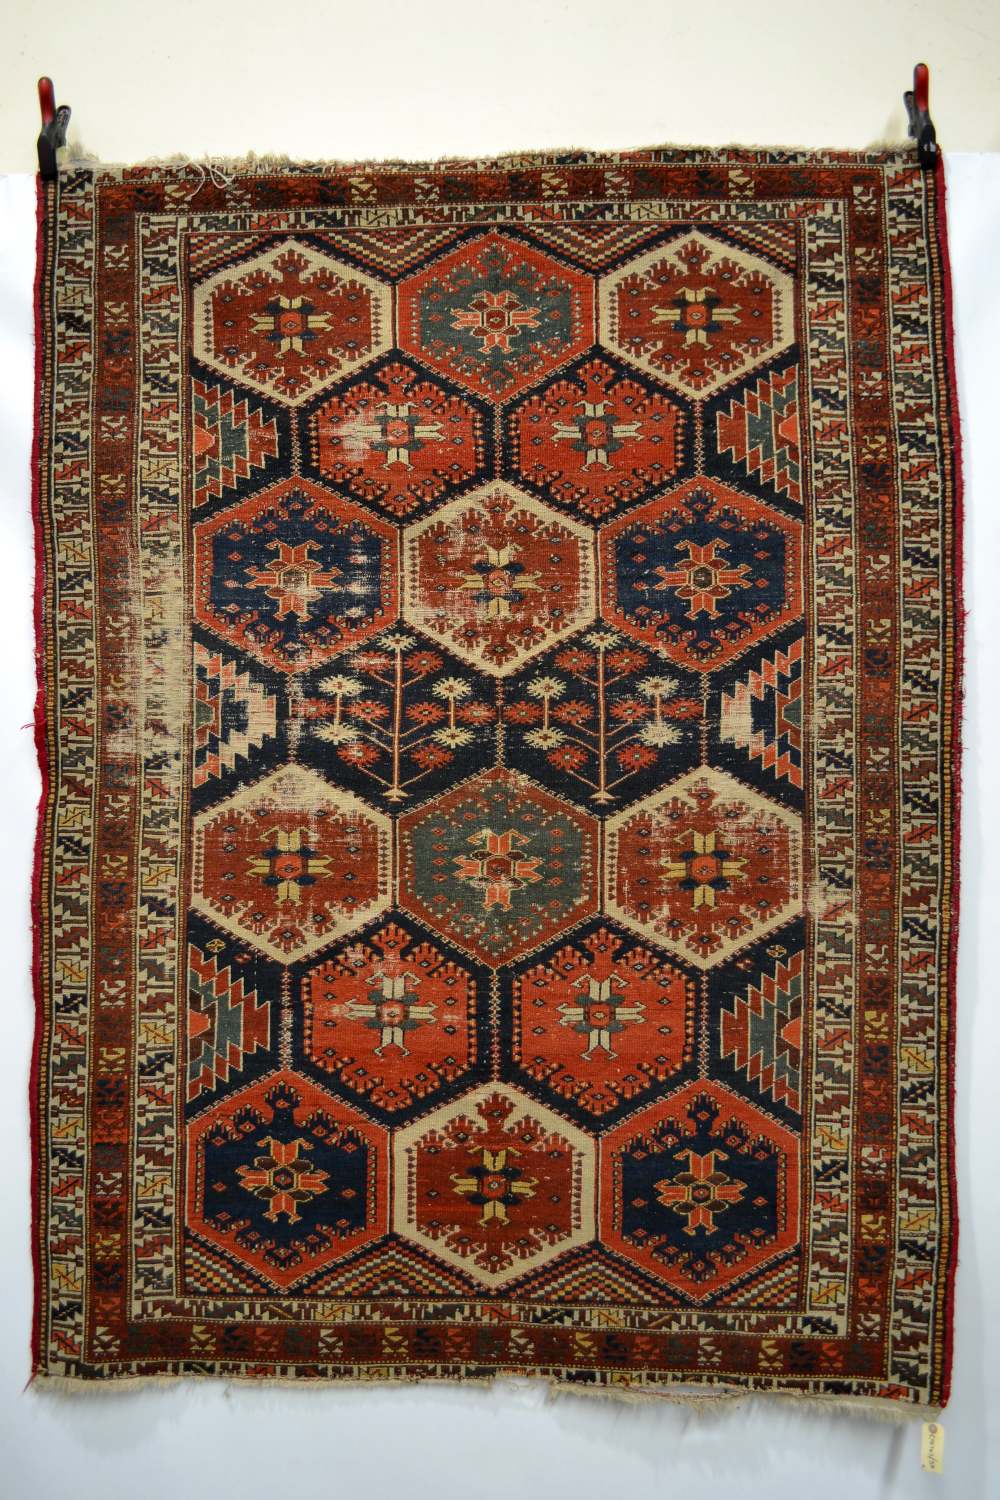 Afshar rug, Kerman area, south west Persia, about 1920s, 5ft. 8in. x 4ft. 2in. 1.73m. x 1.27m.